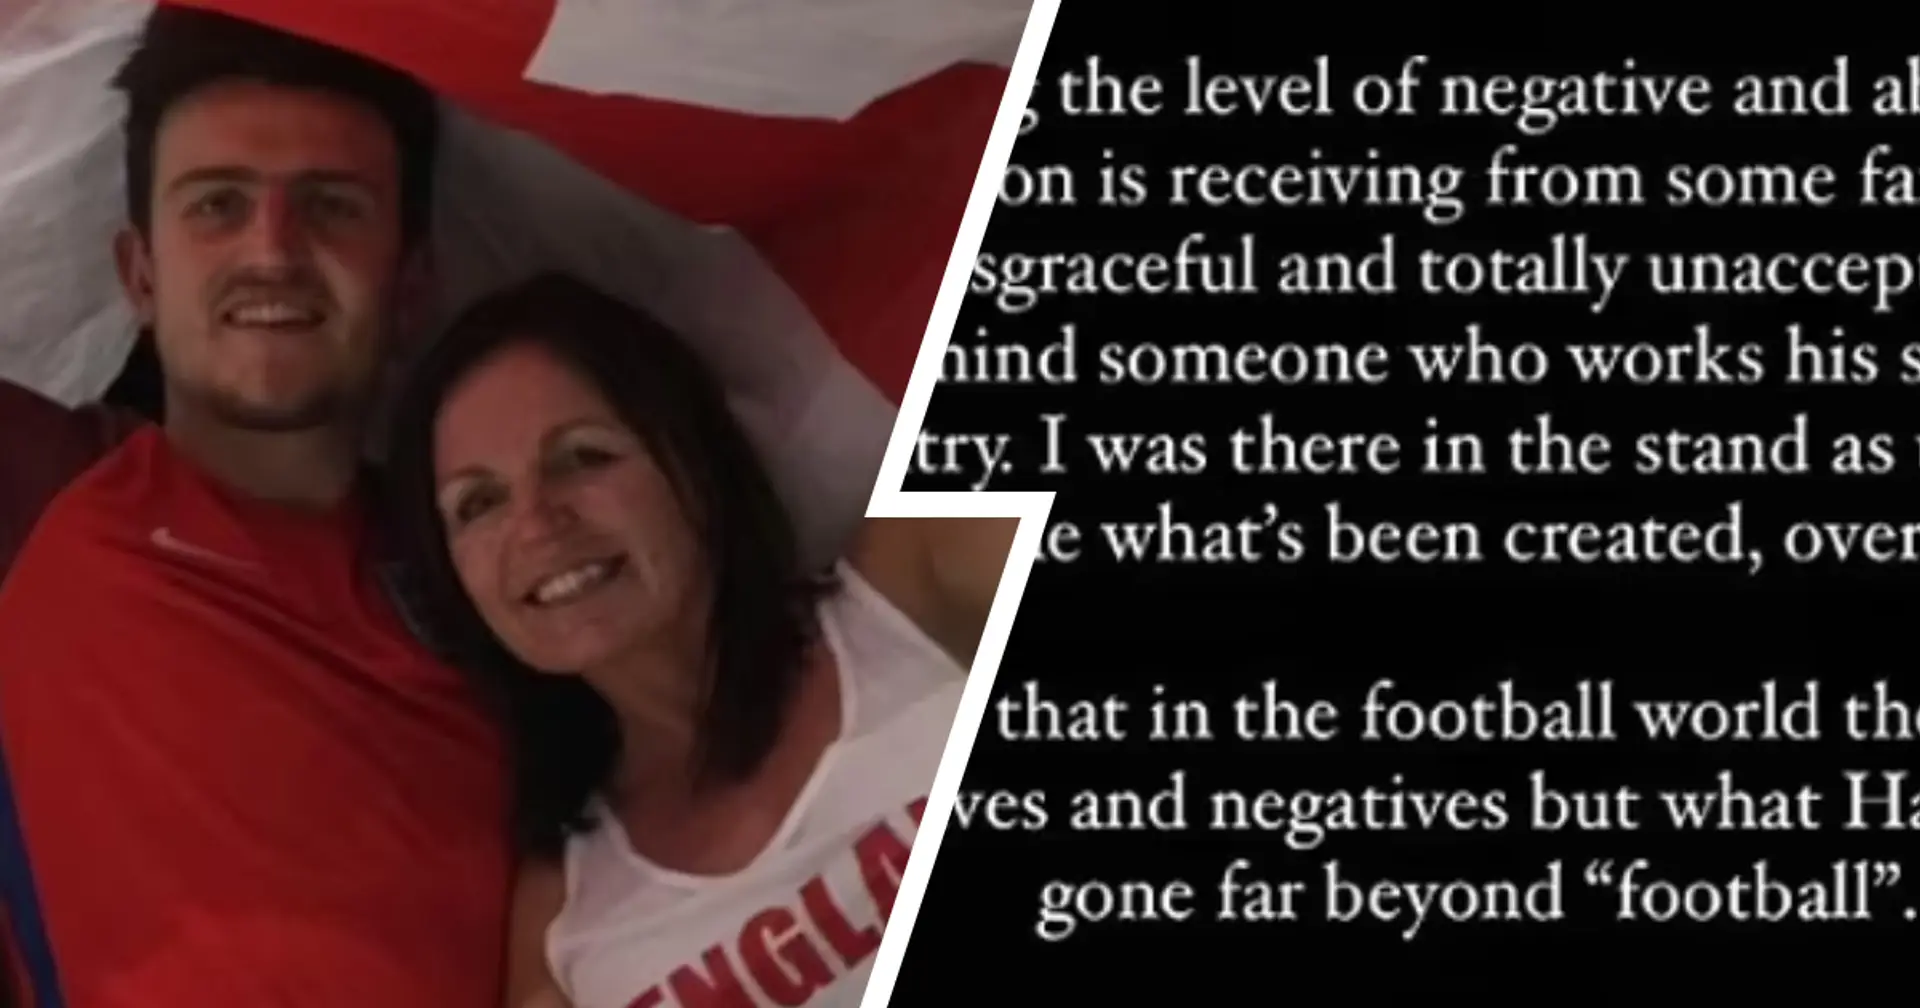 'I wish this sort of abuse on nobody': Harry Maguire's mother defends him in passionate statement